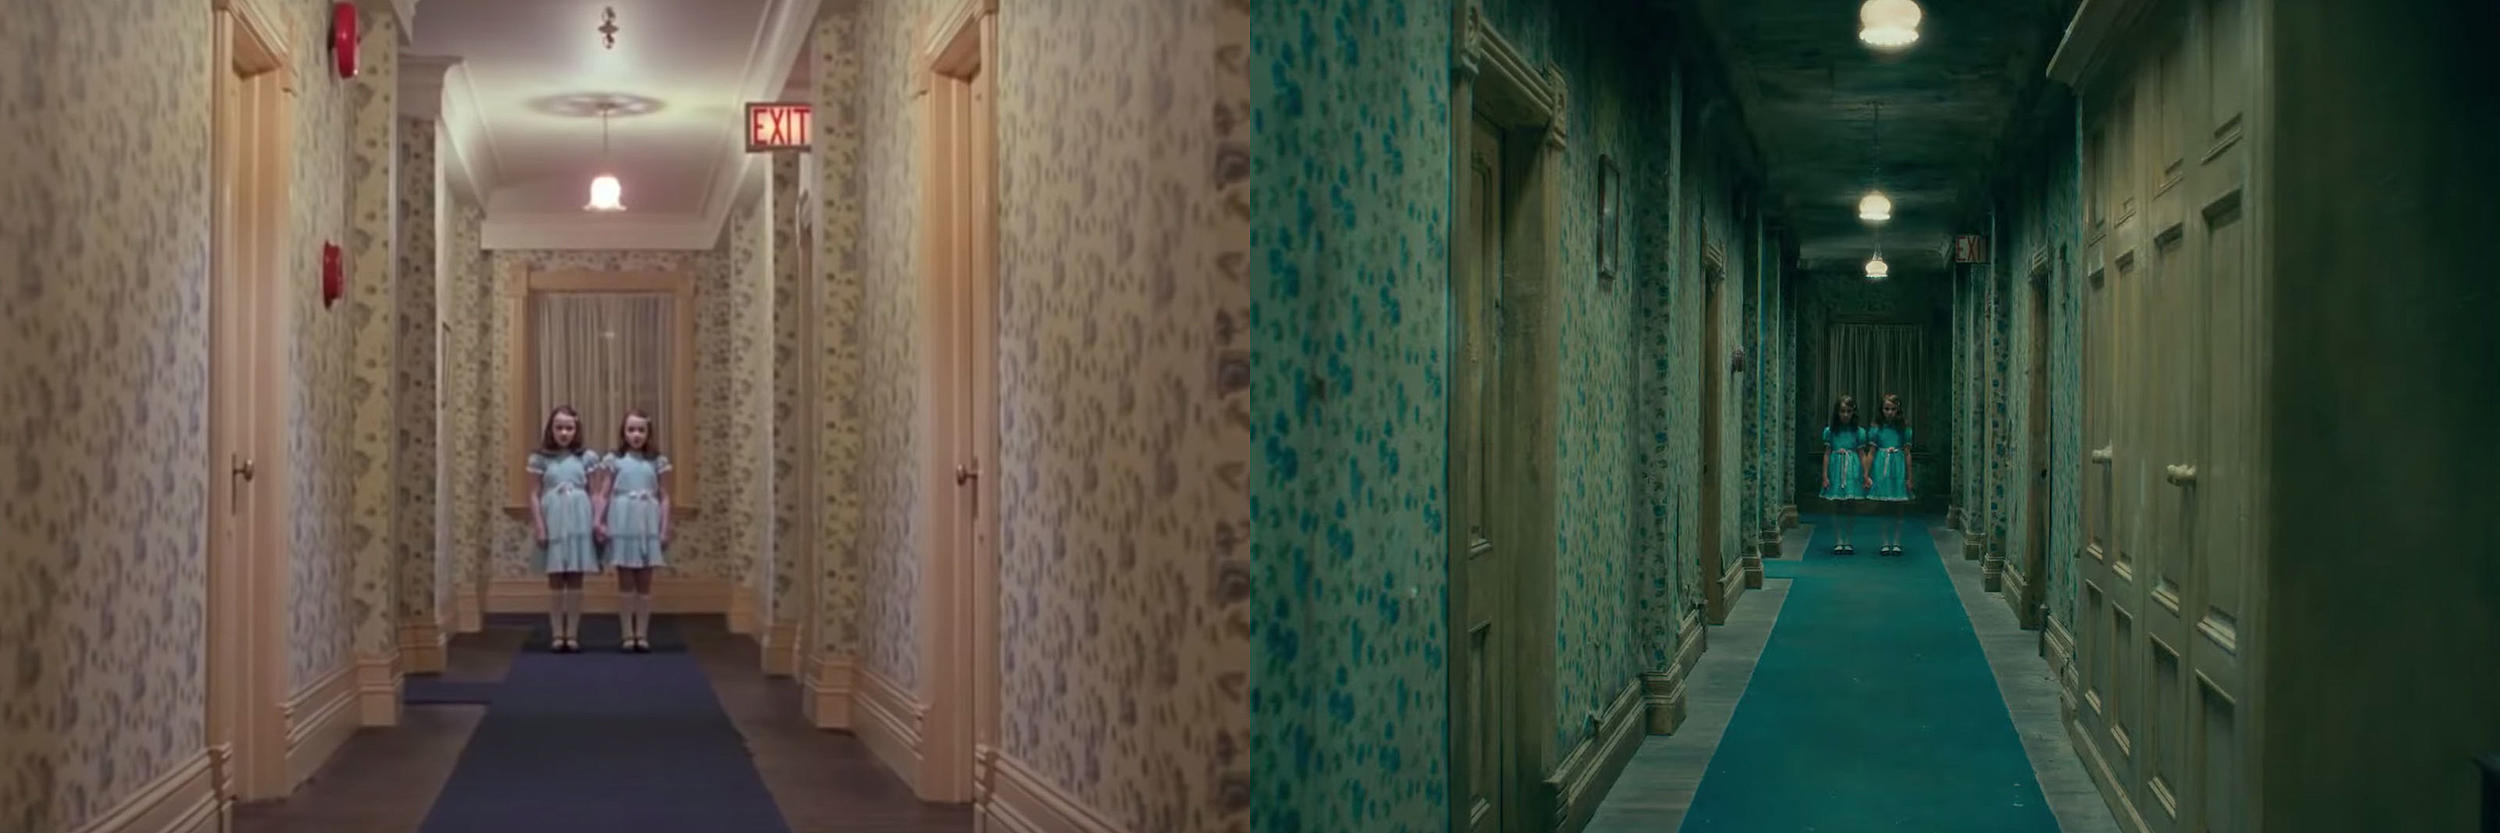 Let S Compare Doctor Sleep S Version Of The Shining To Kubrick S